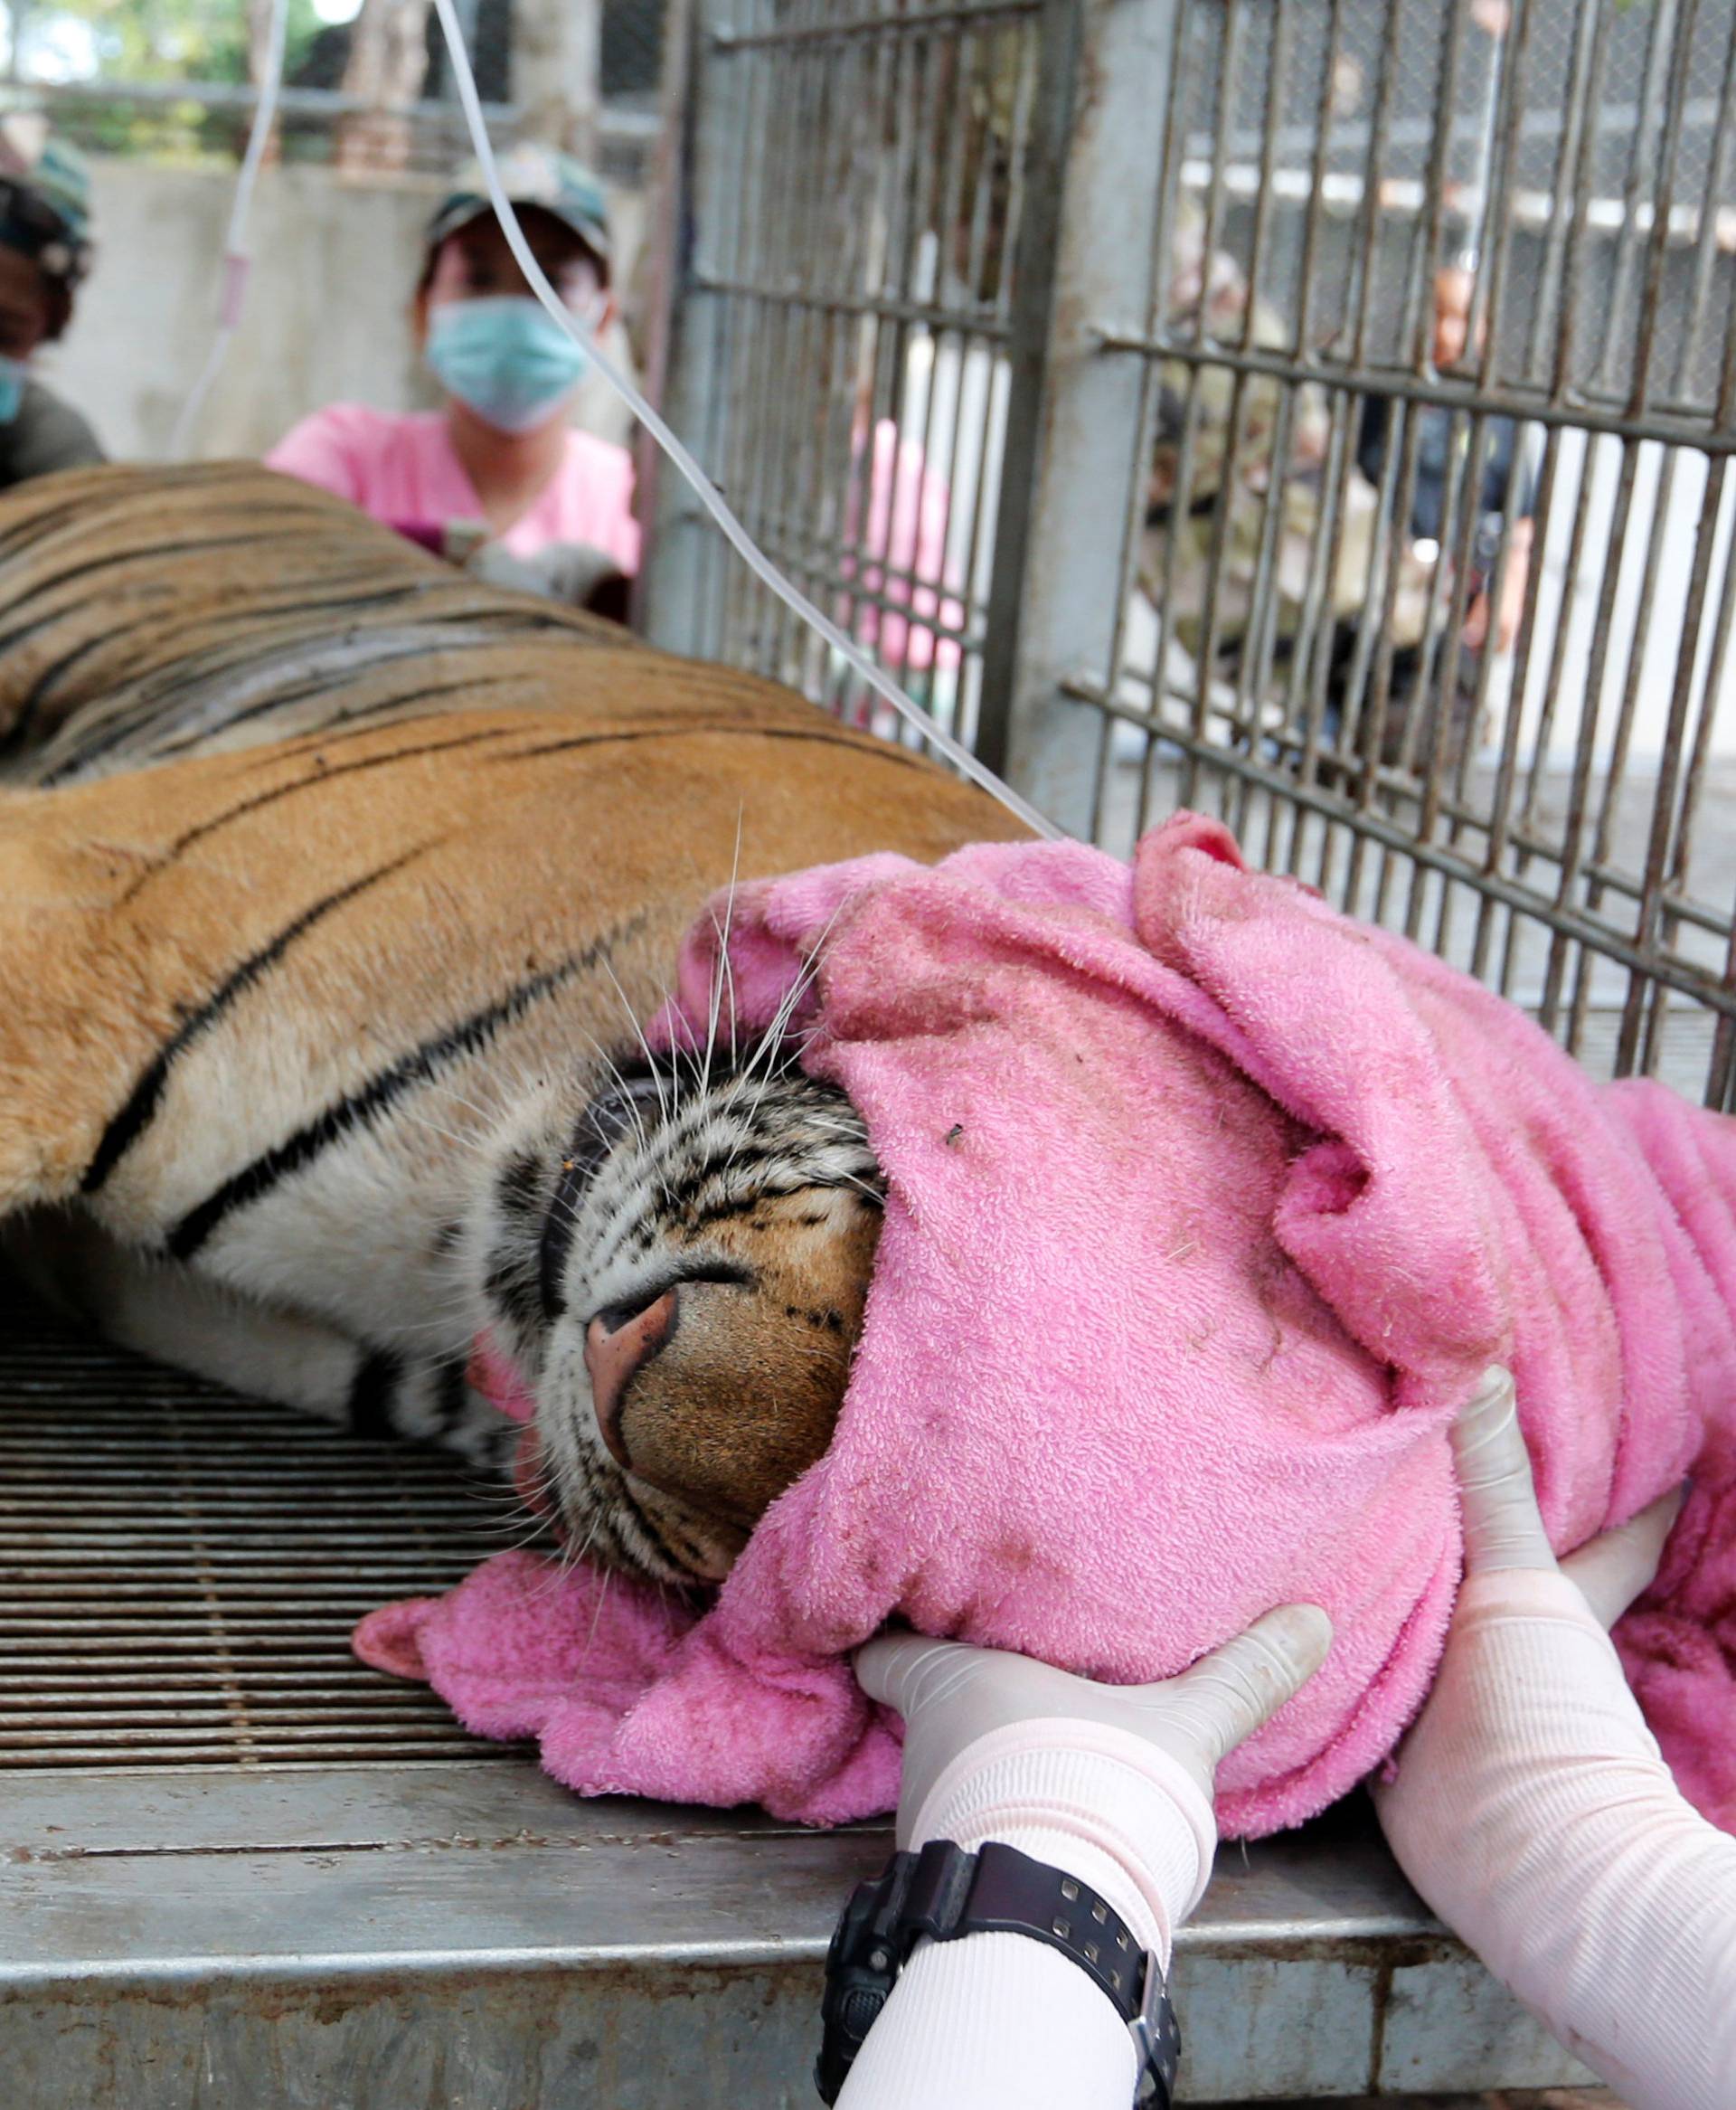 A sedated tiger is seen in a cage as officials continue moving live tigers from the controversial Tiger Temple, in Kanchanaburi province